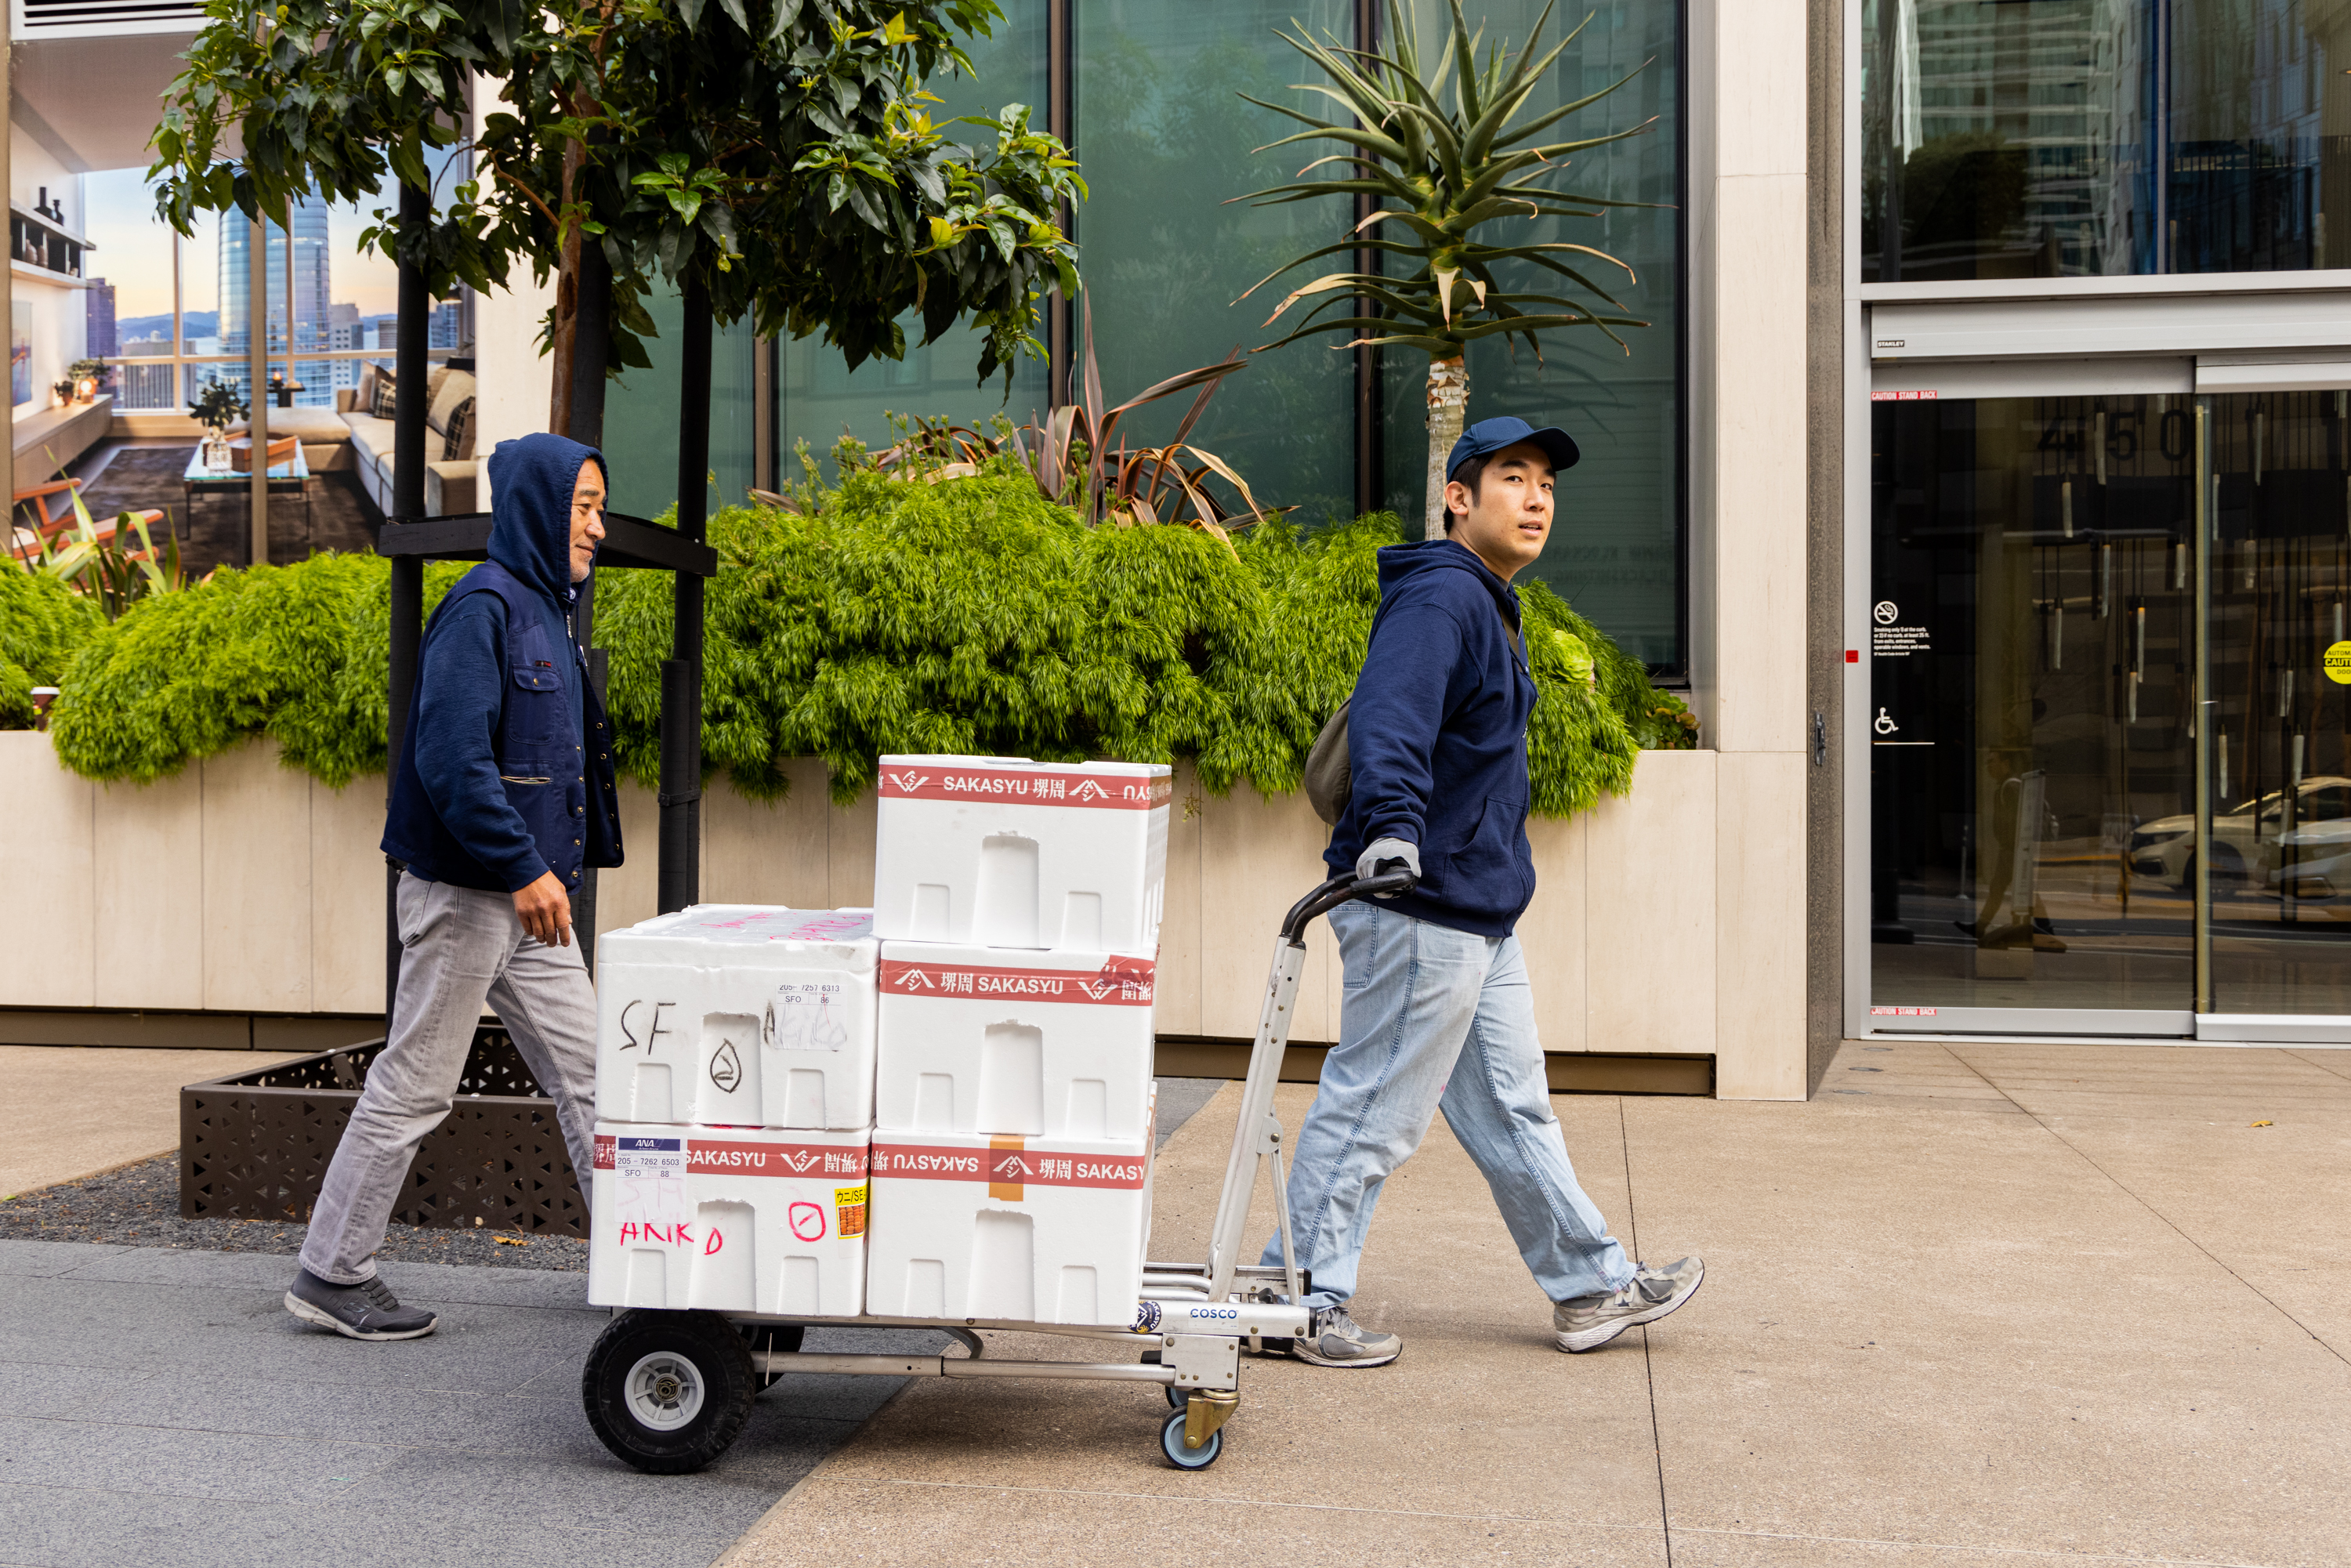 Two men are walking on a sidewalk, one pulling a handcart loaded with white boxes. They are dressed in casual clothing, and the background features greenery and modern buildings.